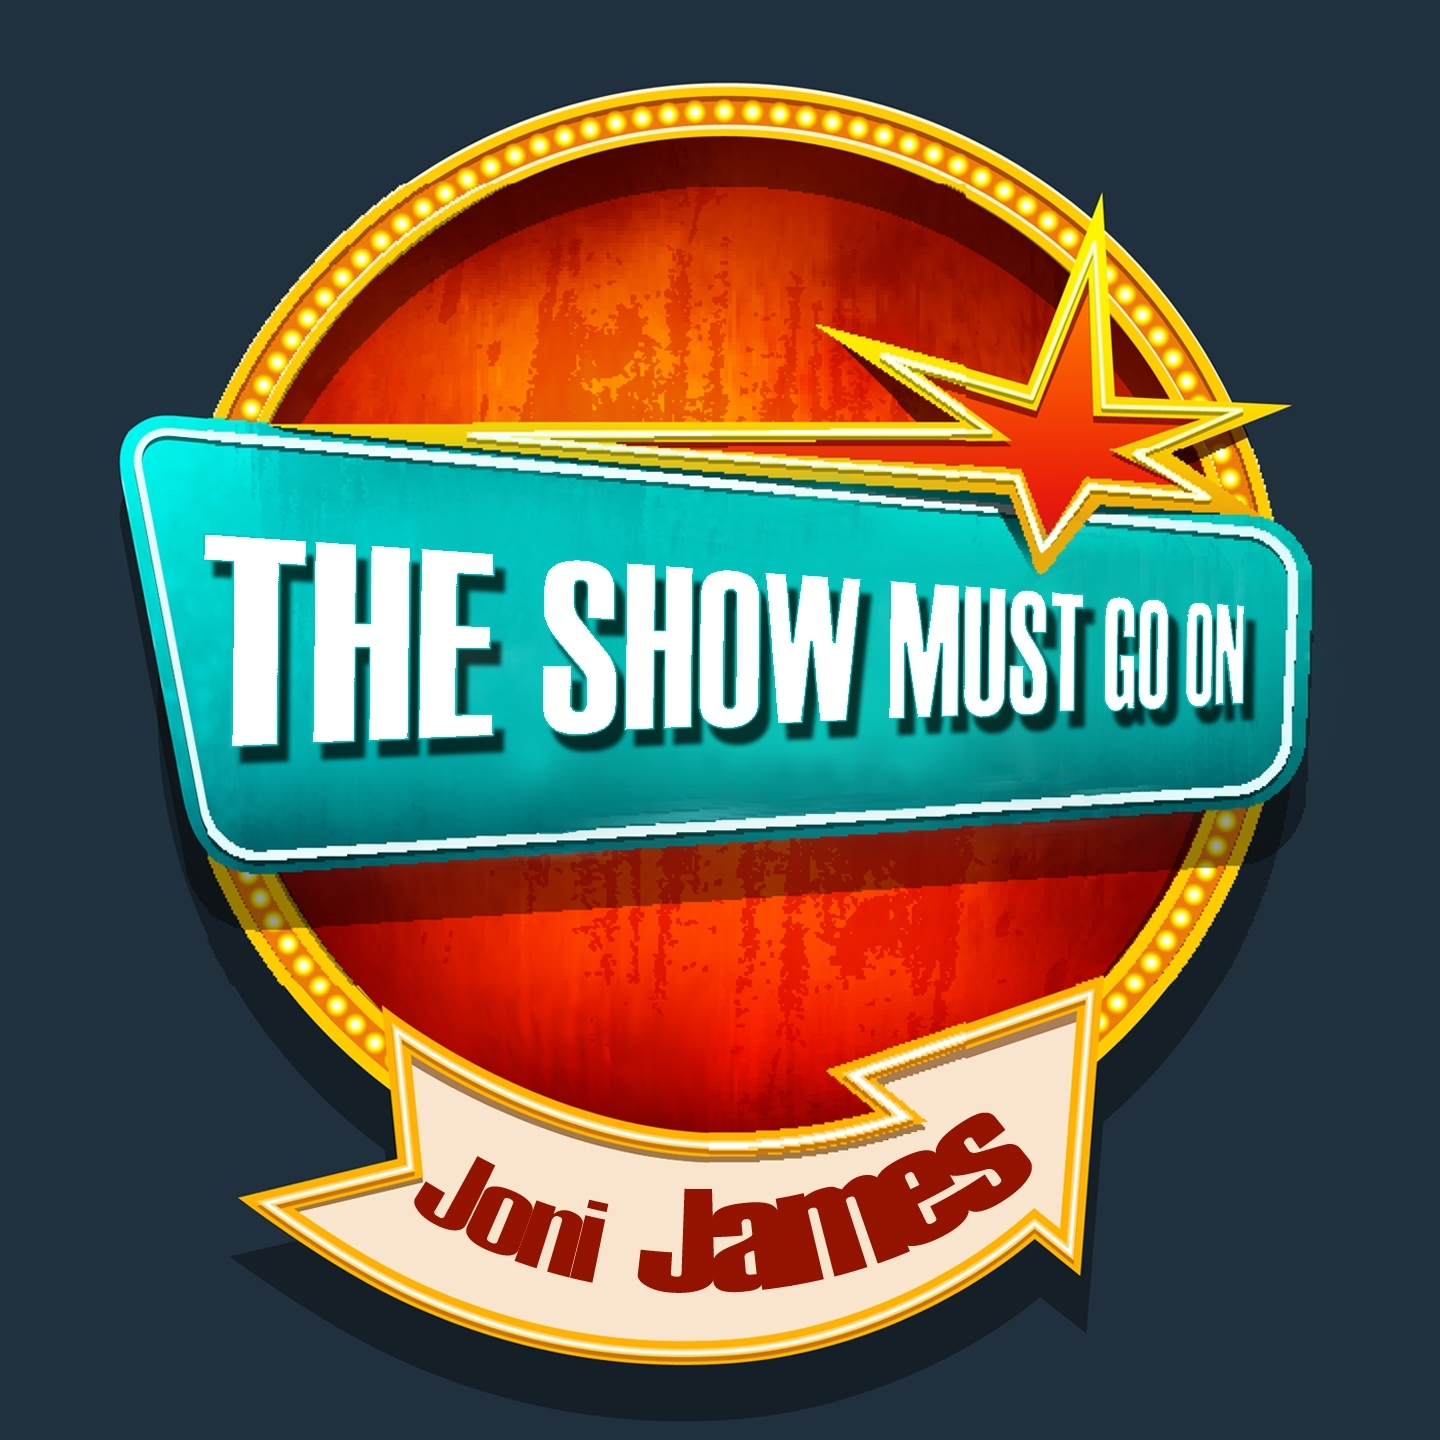 THE SHOW MUST GO ON with Joni James (Remastered)